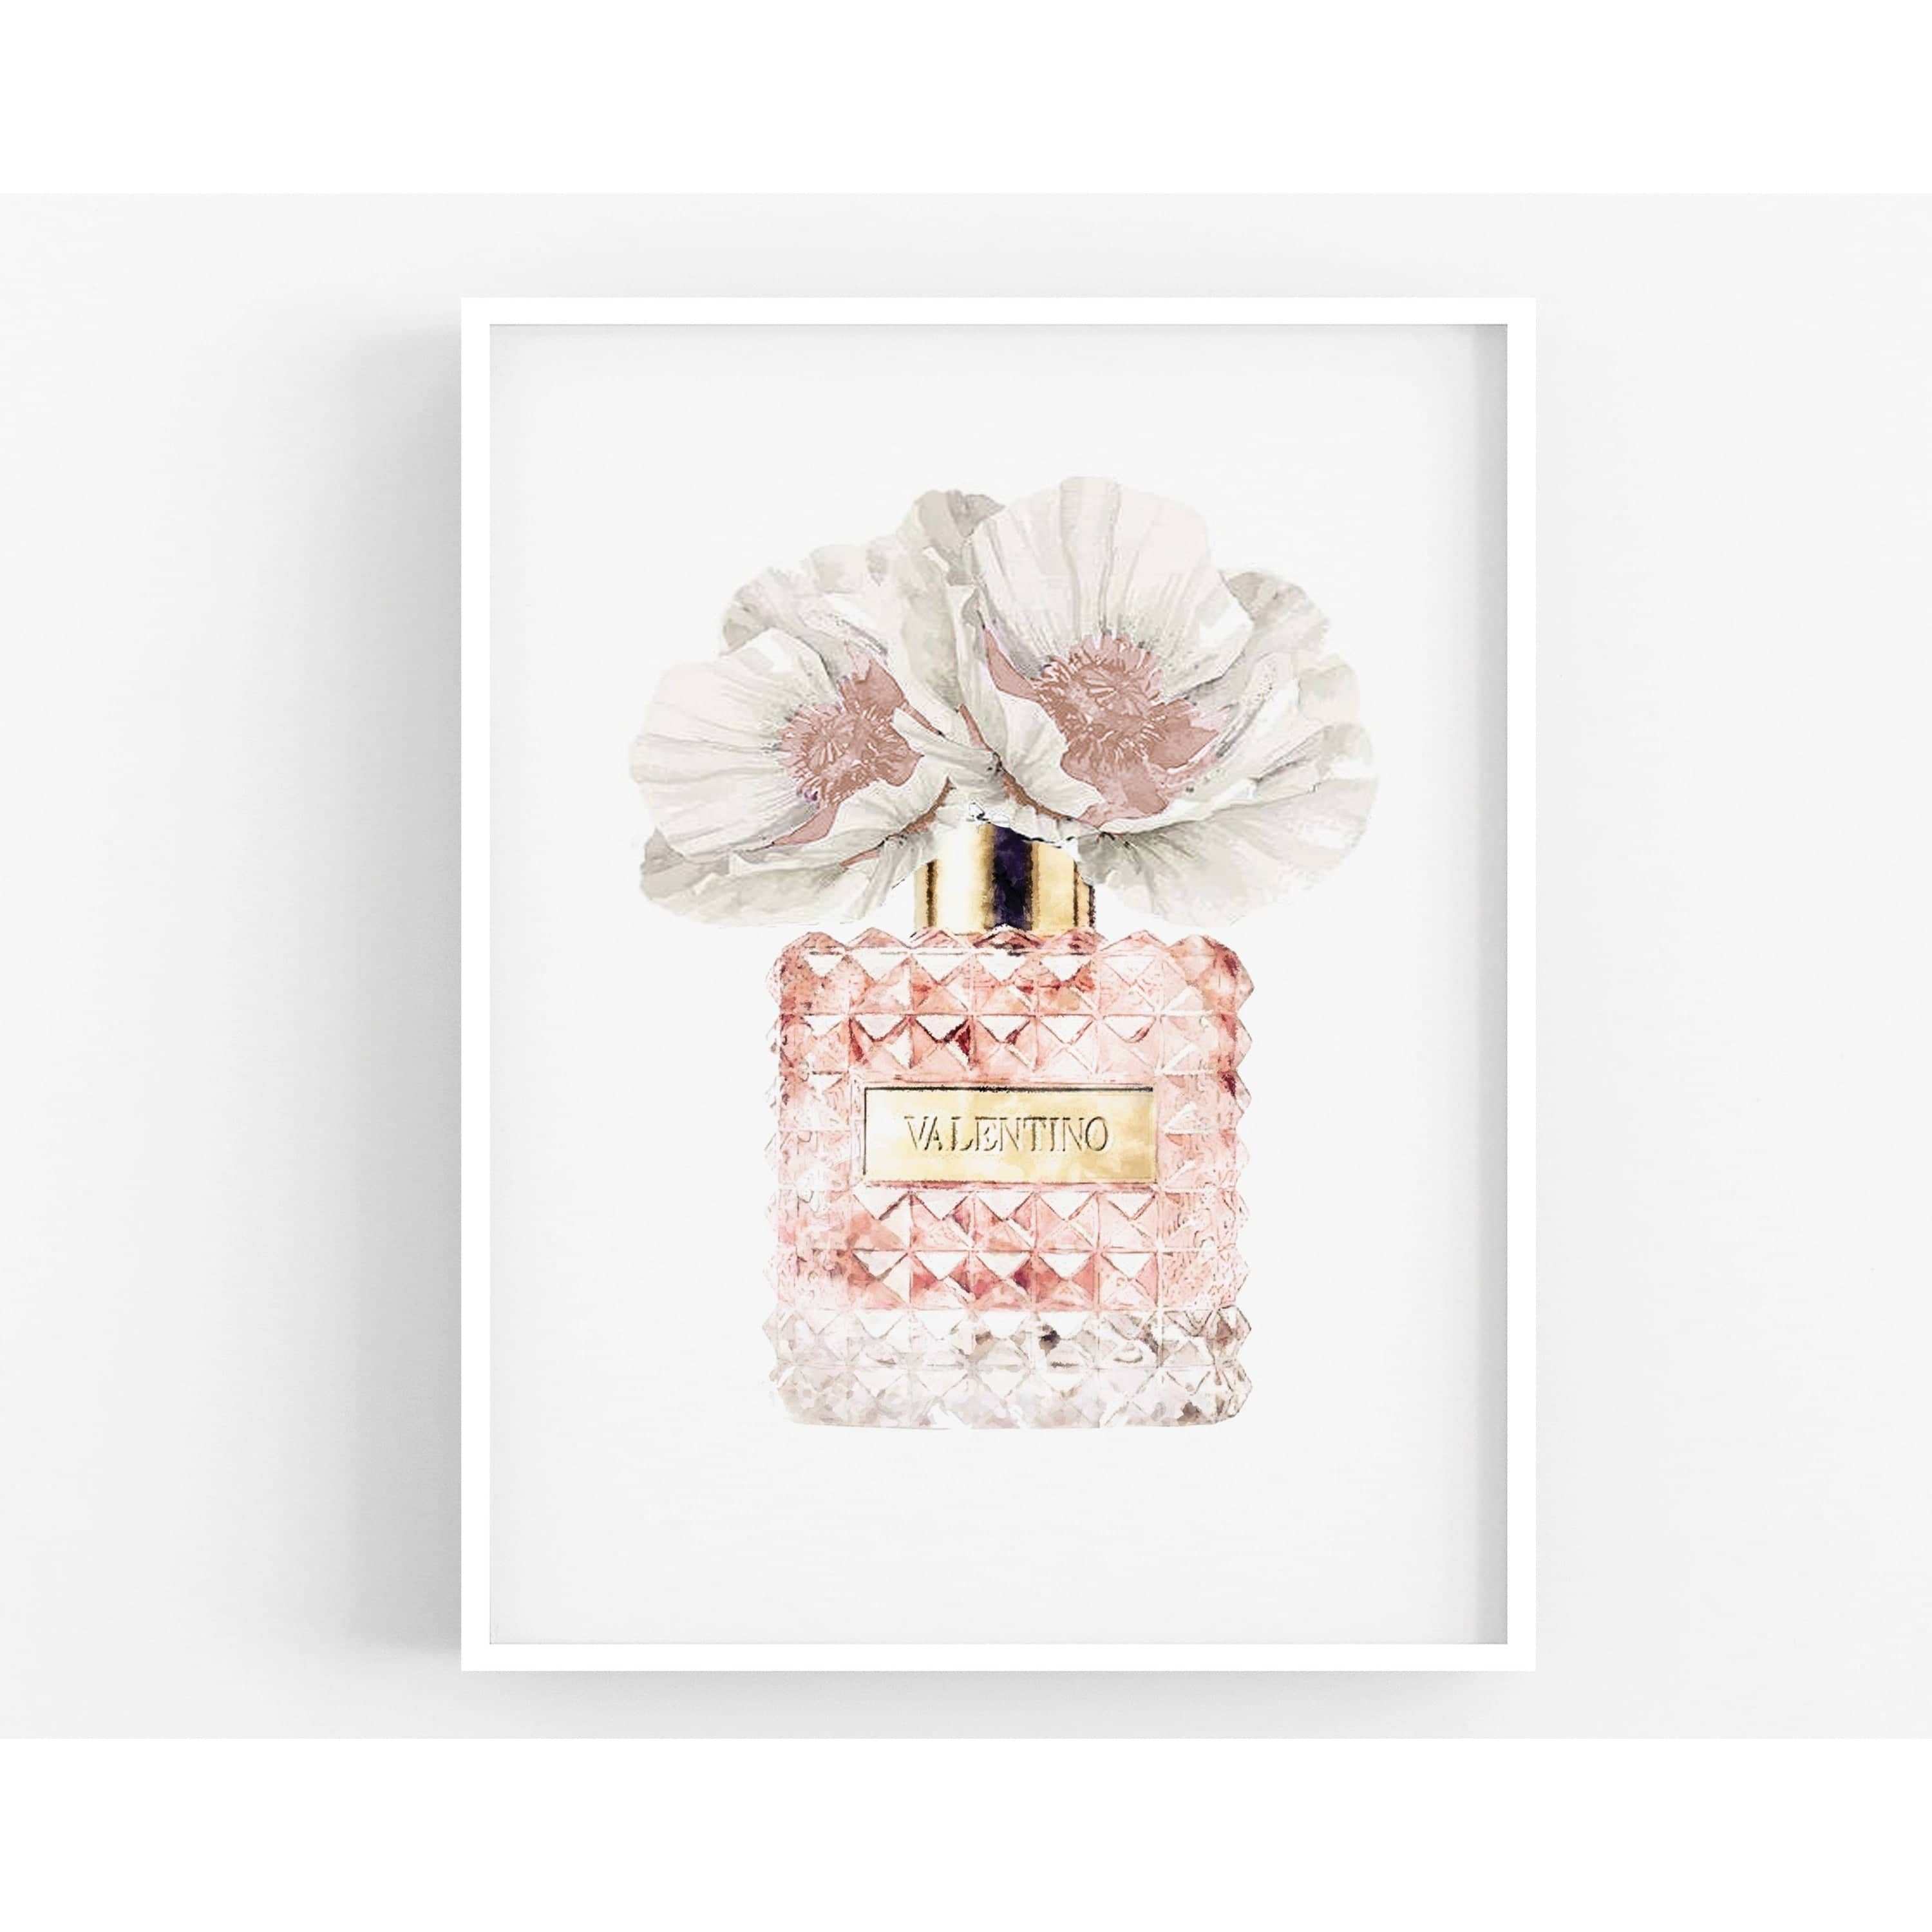 Blush Pink Floral Perfume and Coco - Fashion Prints, Set of 3